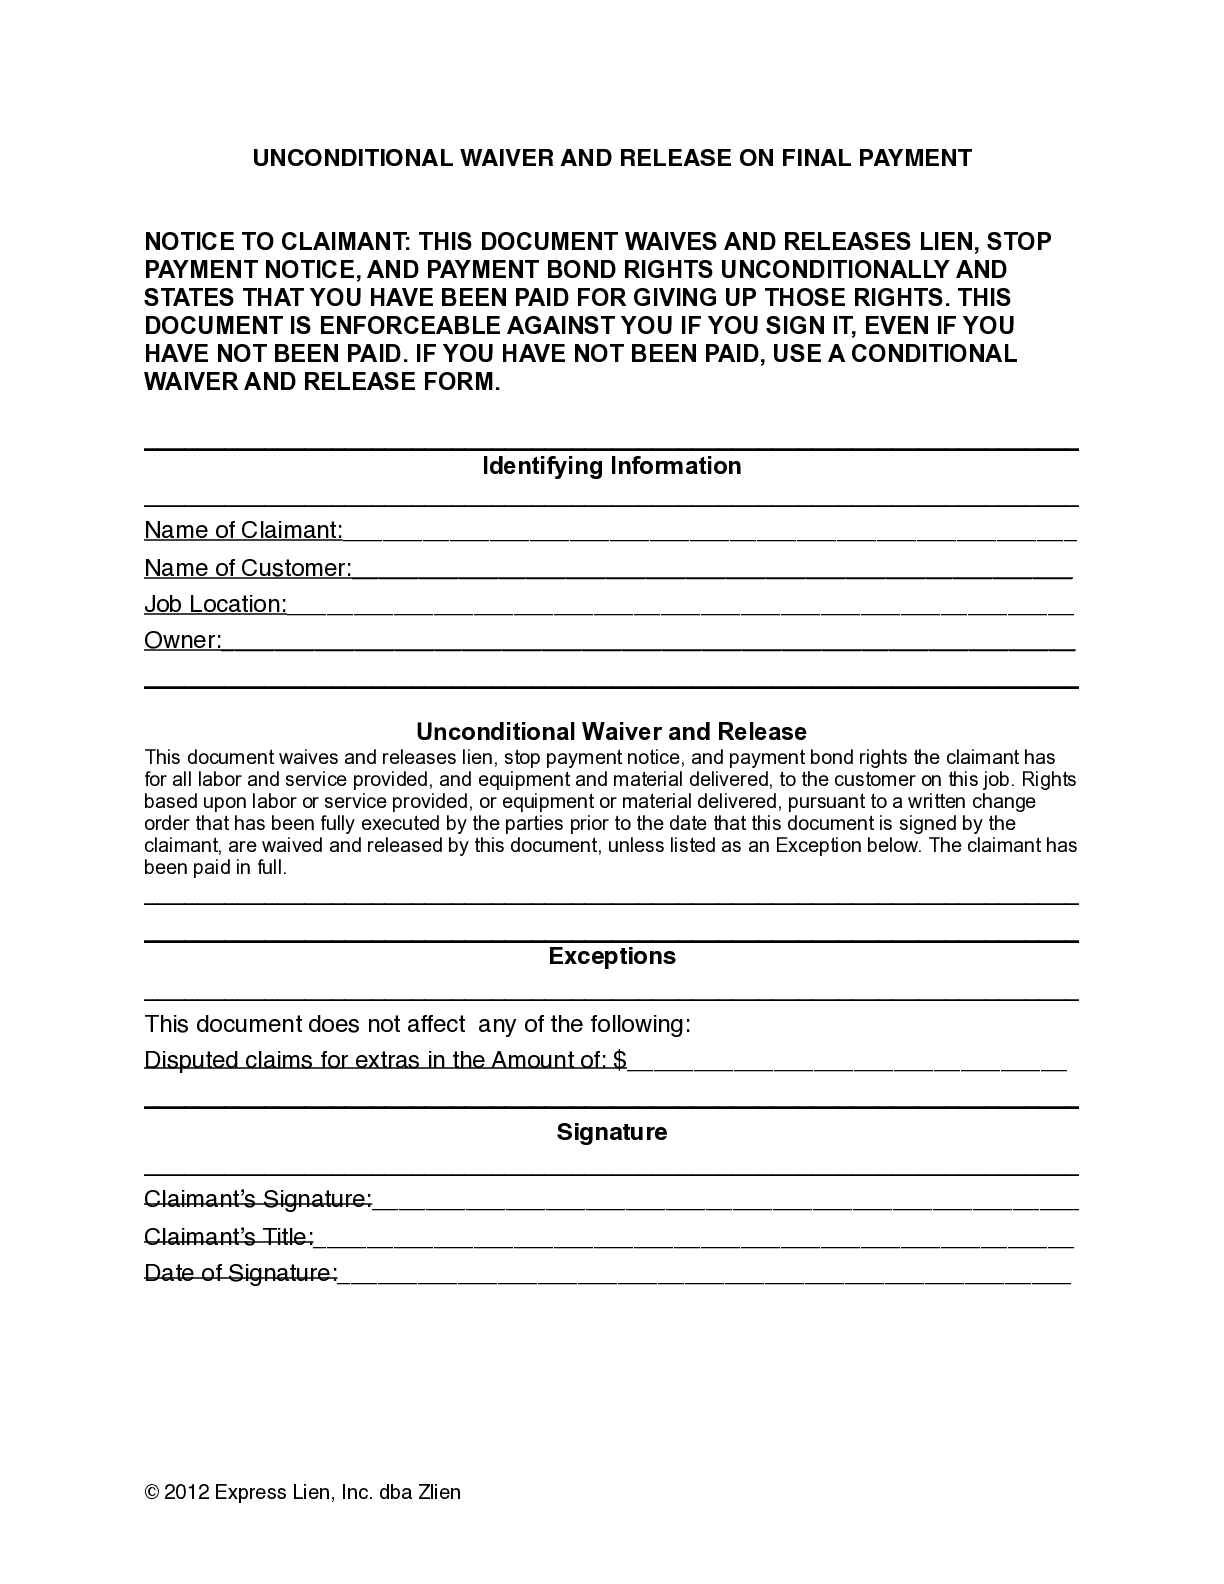 Virginia Final Unconditional Lien Waiver & Release Form - free from